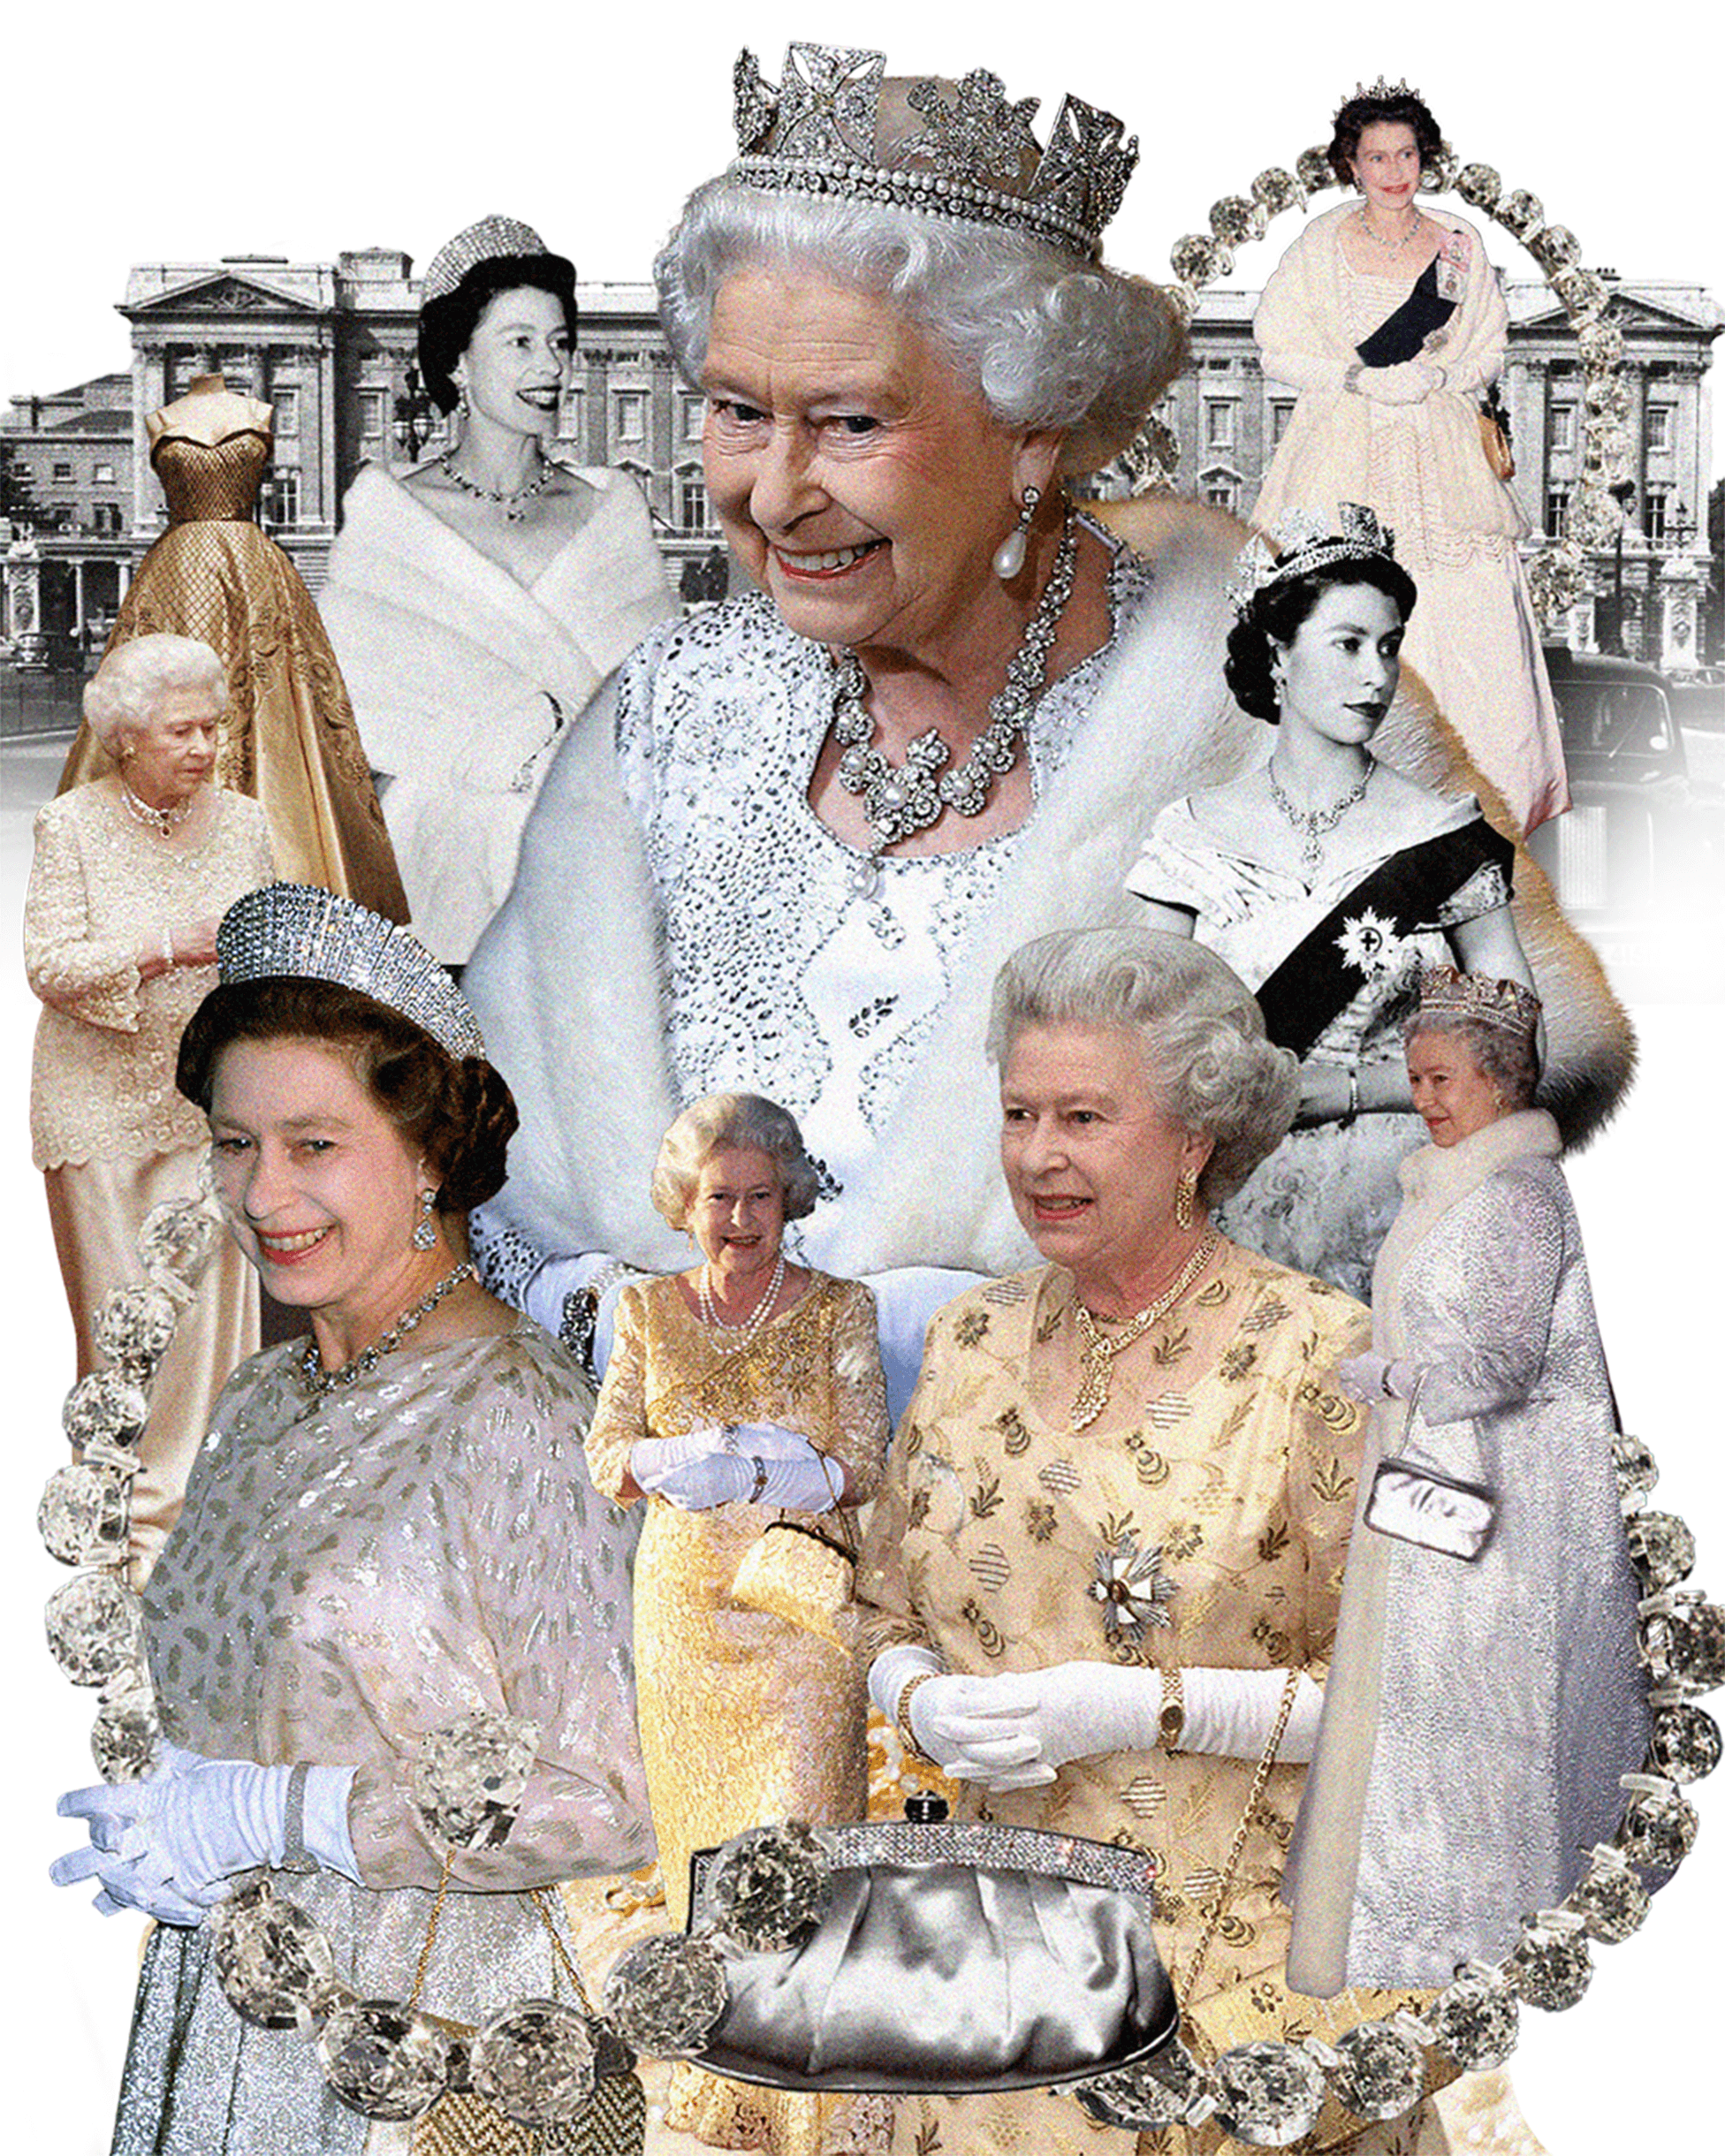 Who needs a crown! Queen sports the trusty Launer handbag for new